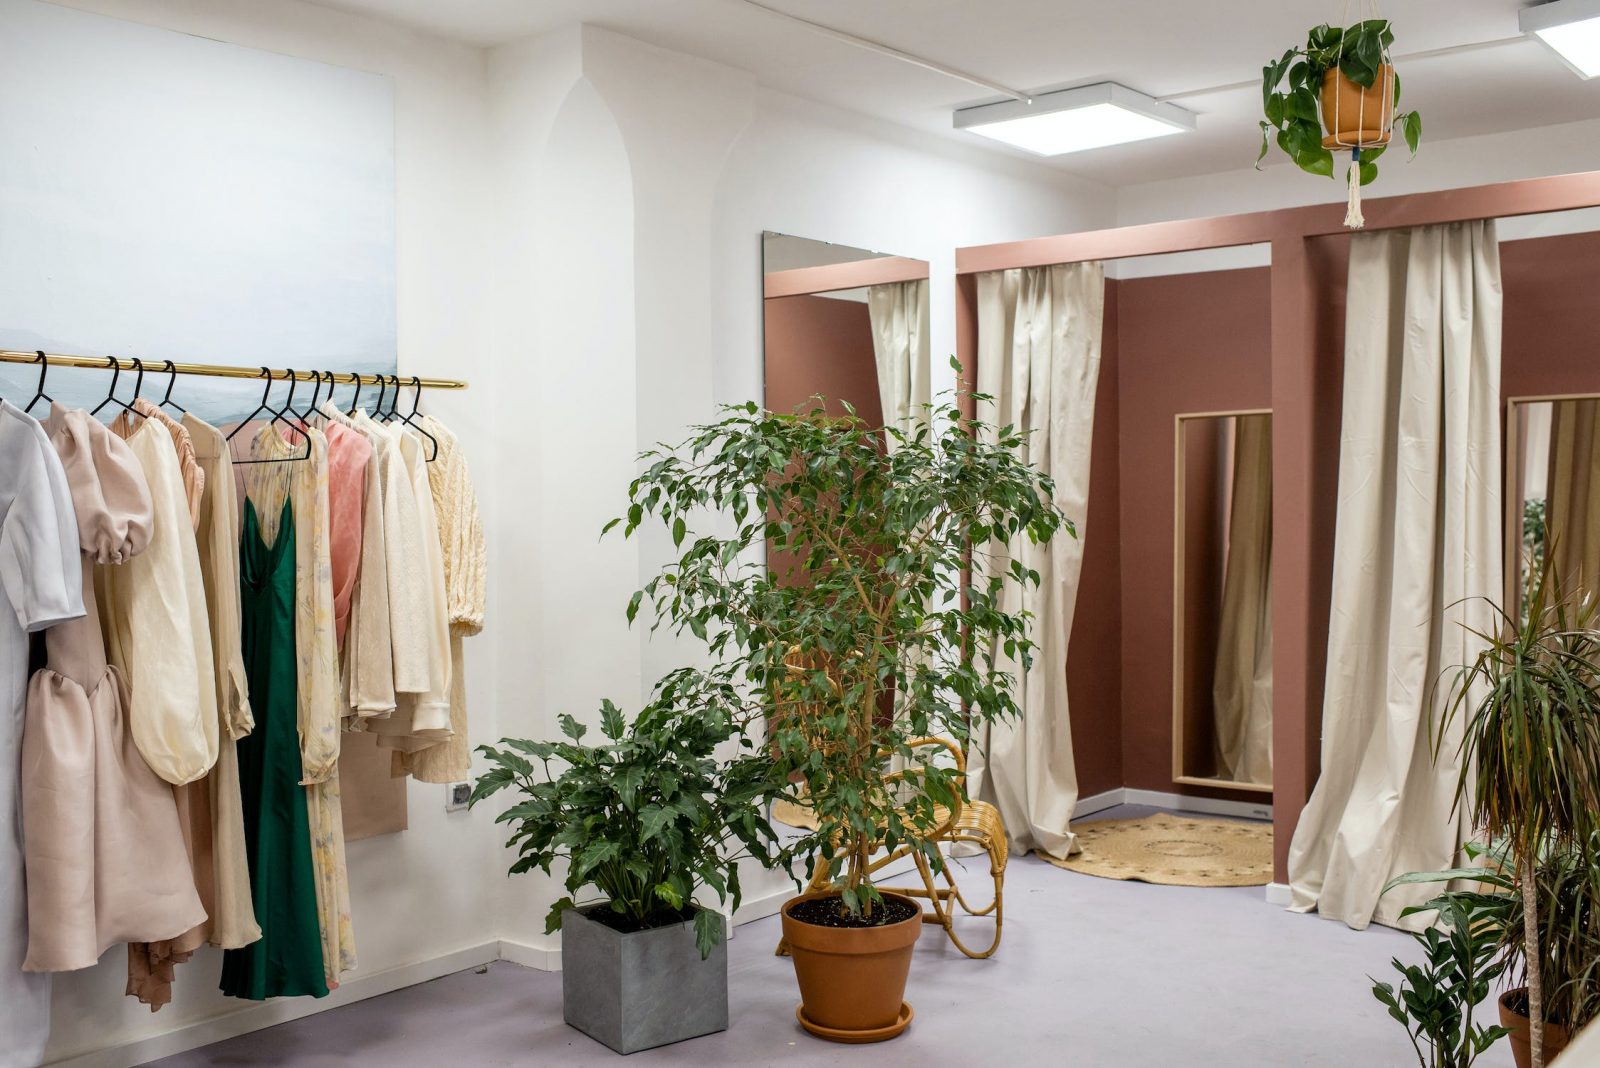 A retail storefront with clothes and plants that uses a retail merchant account for their business.